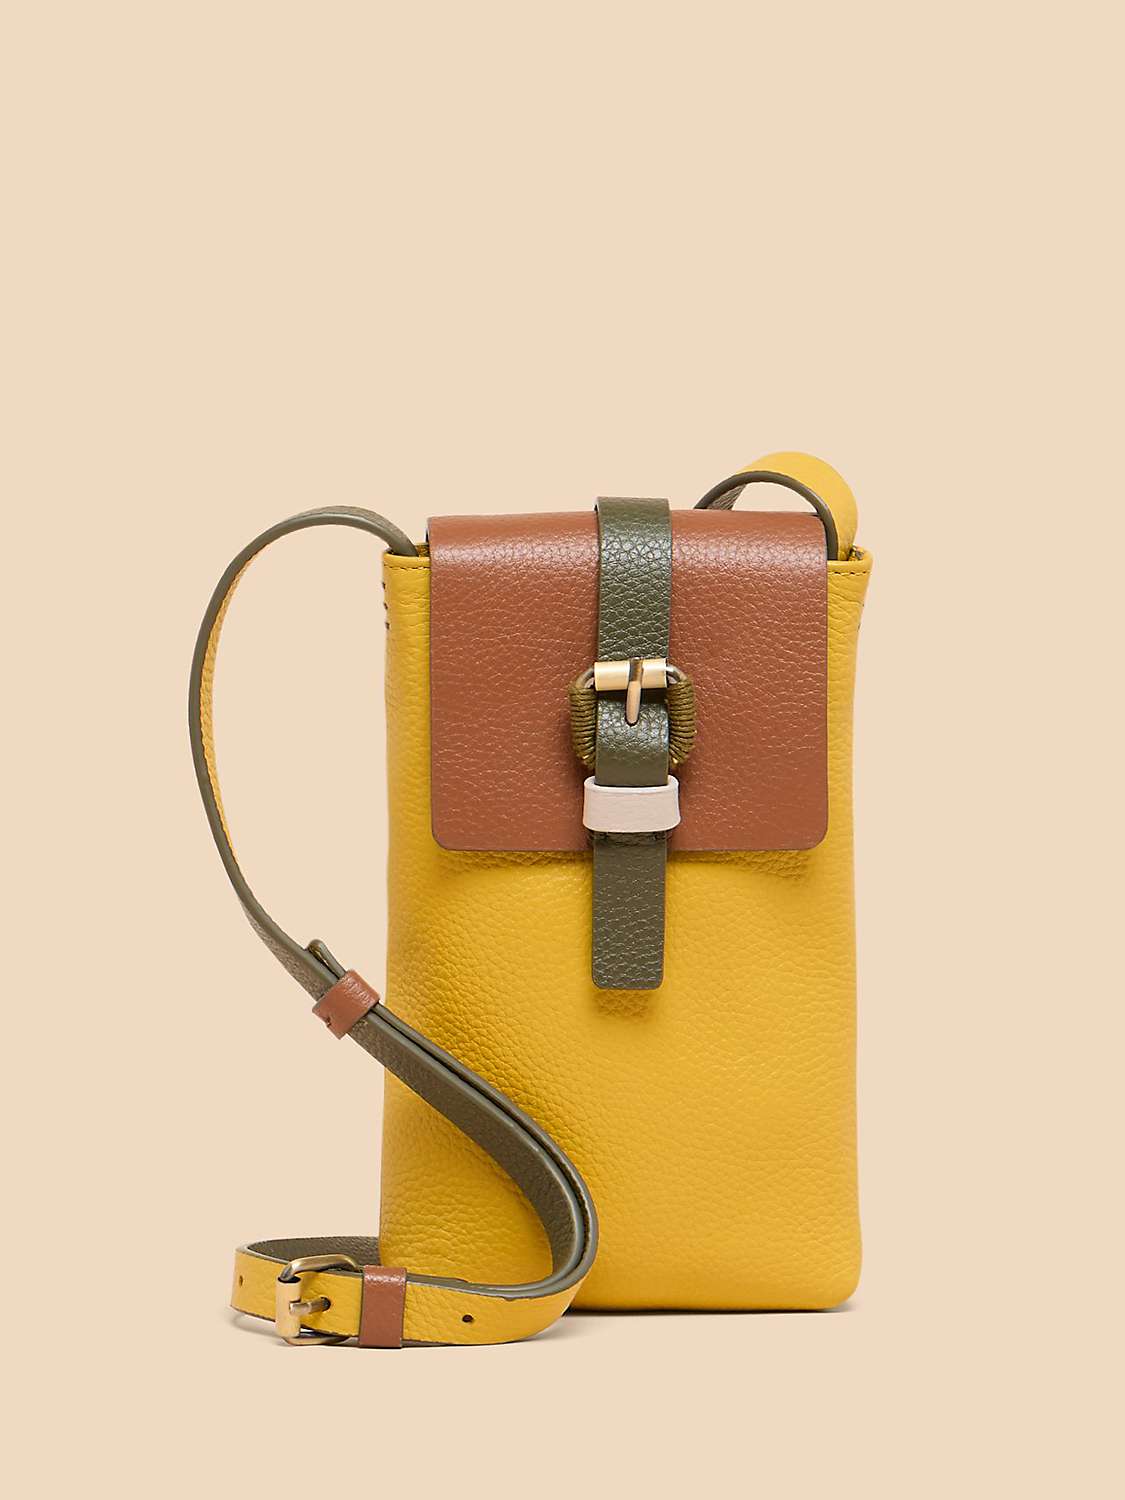 Buy White Stuff Leather Phone Bag, Yellow/Multi Online at johnlewis.com